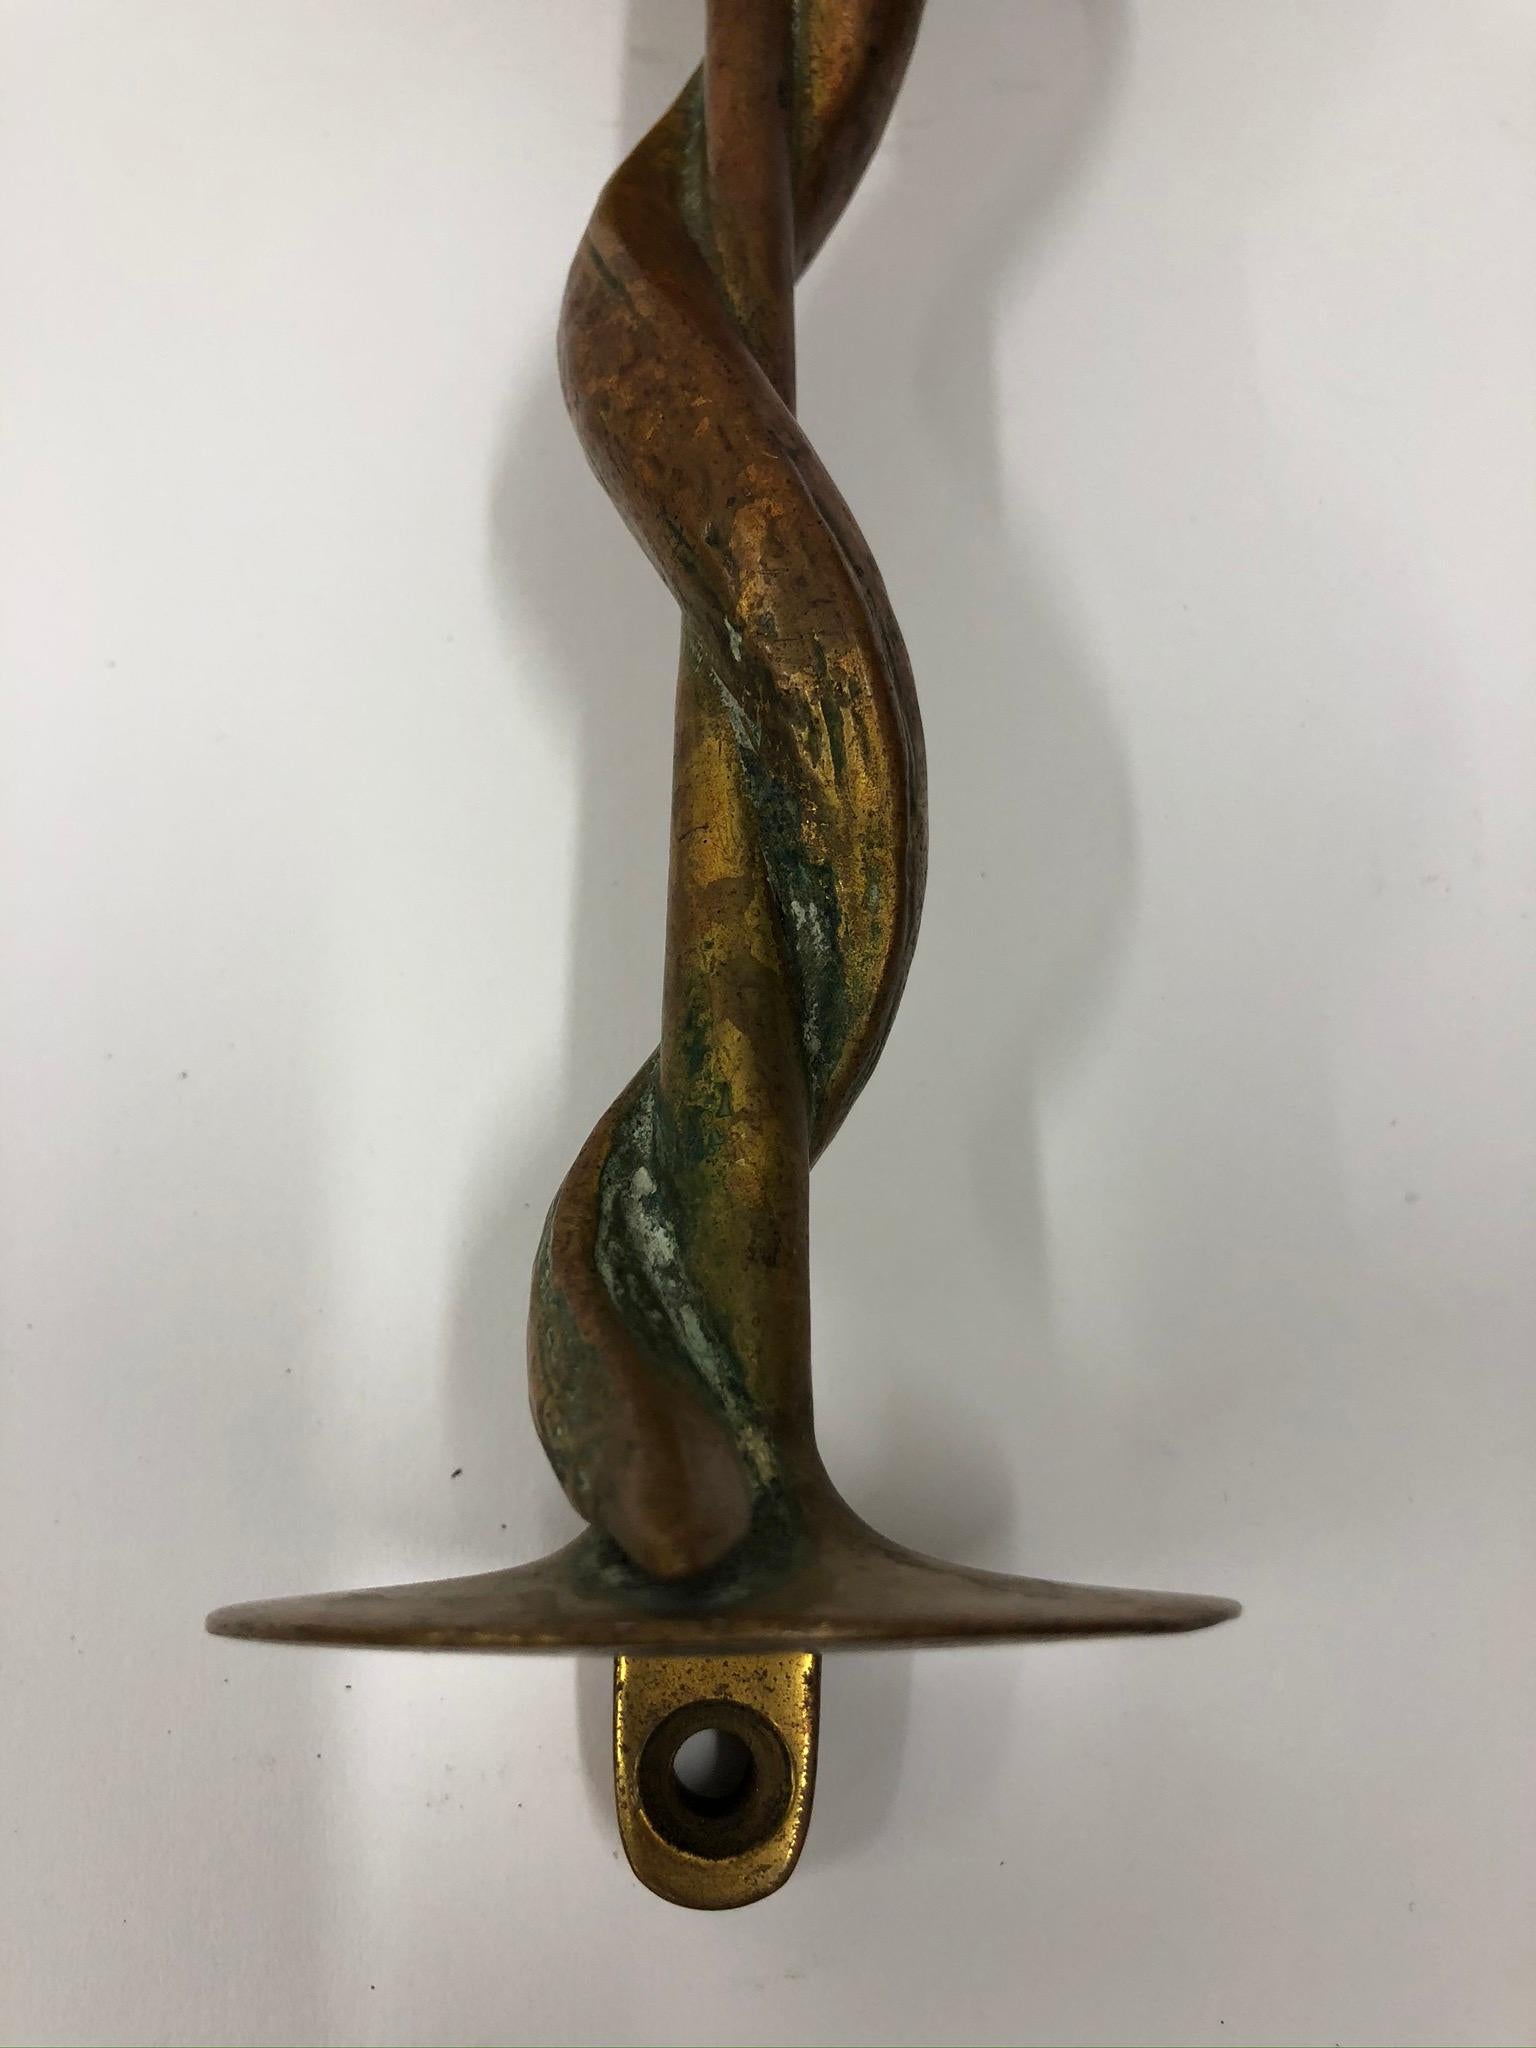 Pair of bronze snake door handles.

Property from esteemed interior designer Juan Montoya. Juan Montoya is one of the most acclaimed and prolific interior designers in the world today. Juan Montoya was born and spent his early years in Colombia.